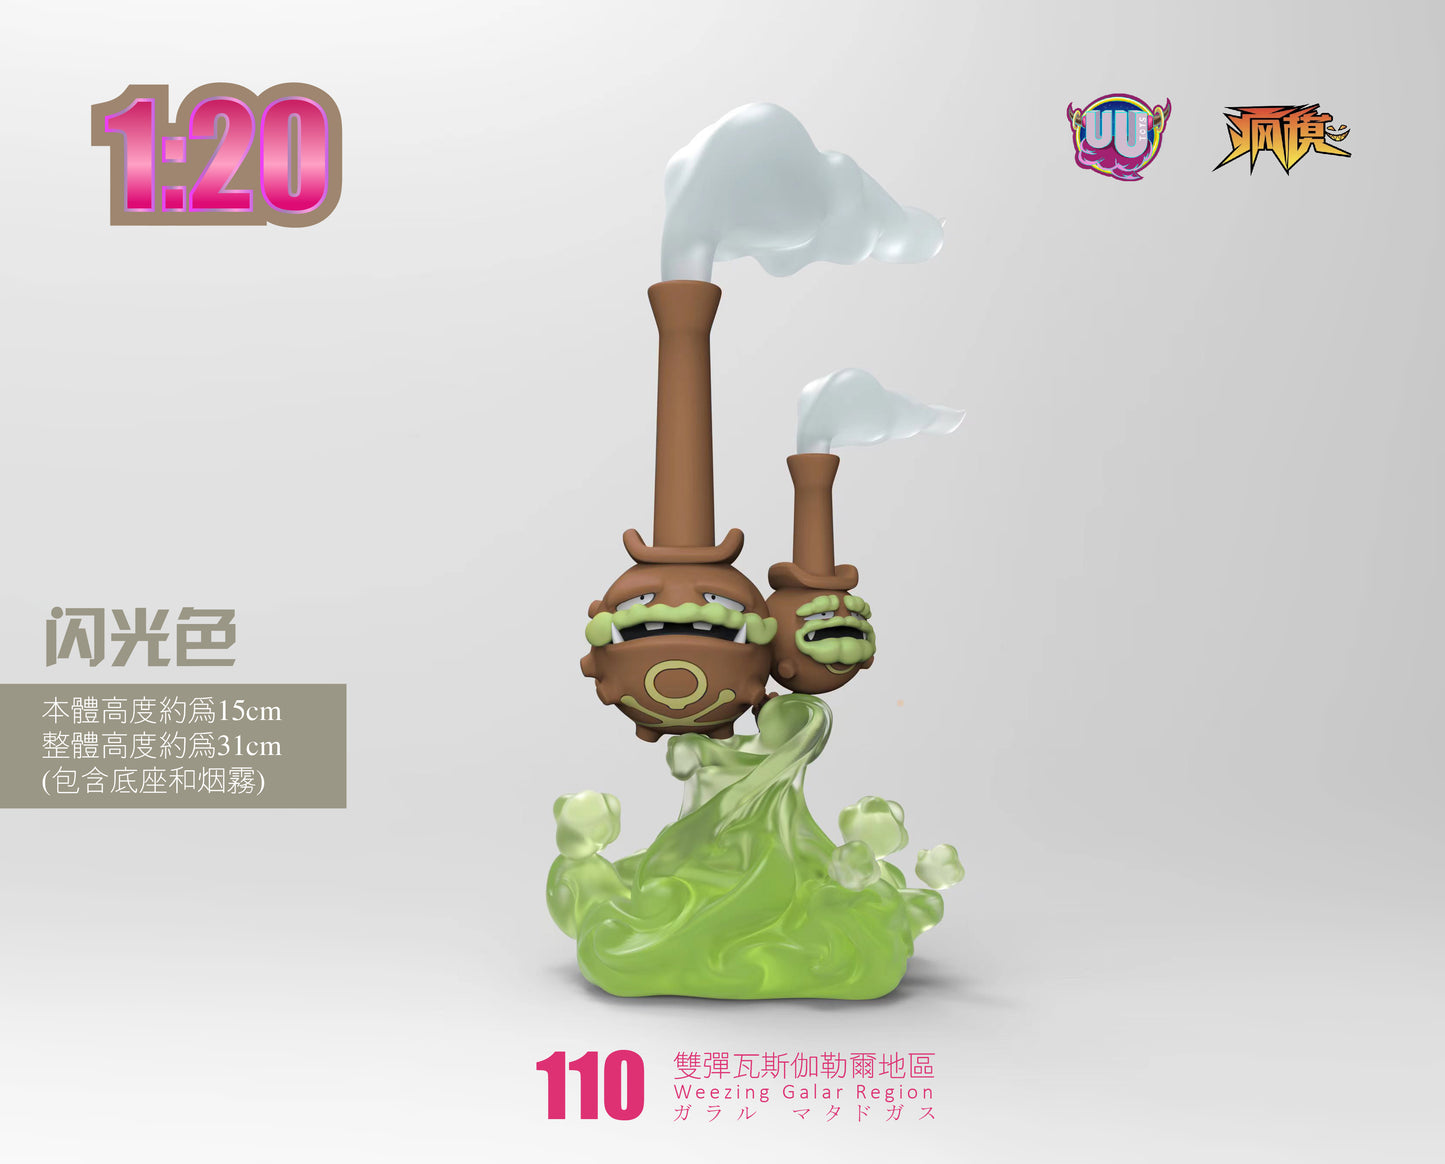 [PREORDER CLOSED] 1/20 Scale World Figure [UU] - Galarian Weezing